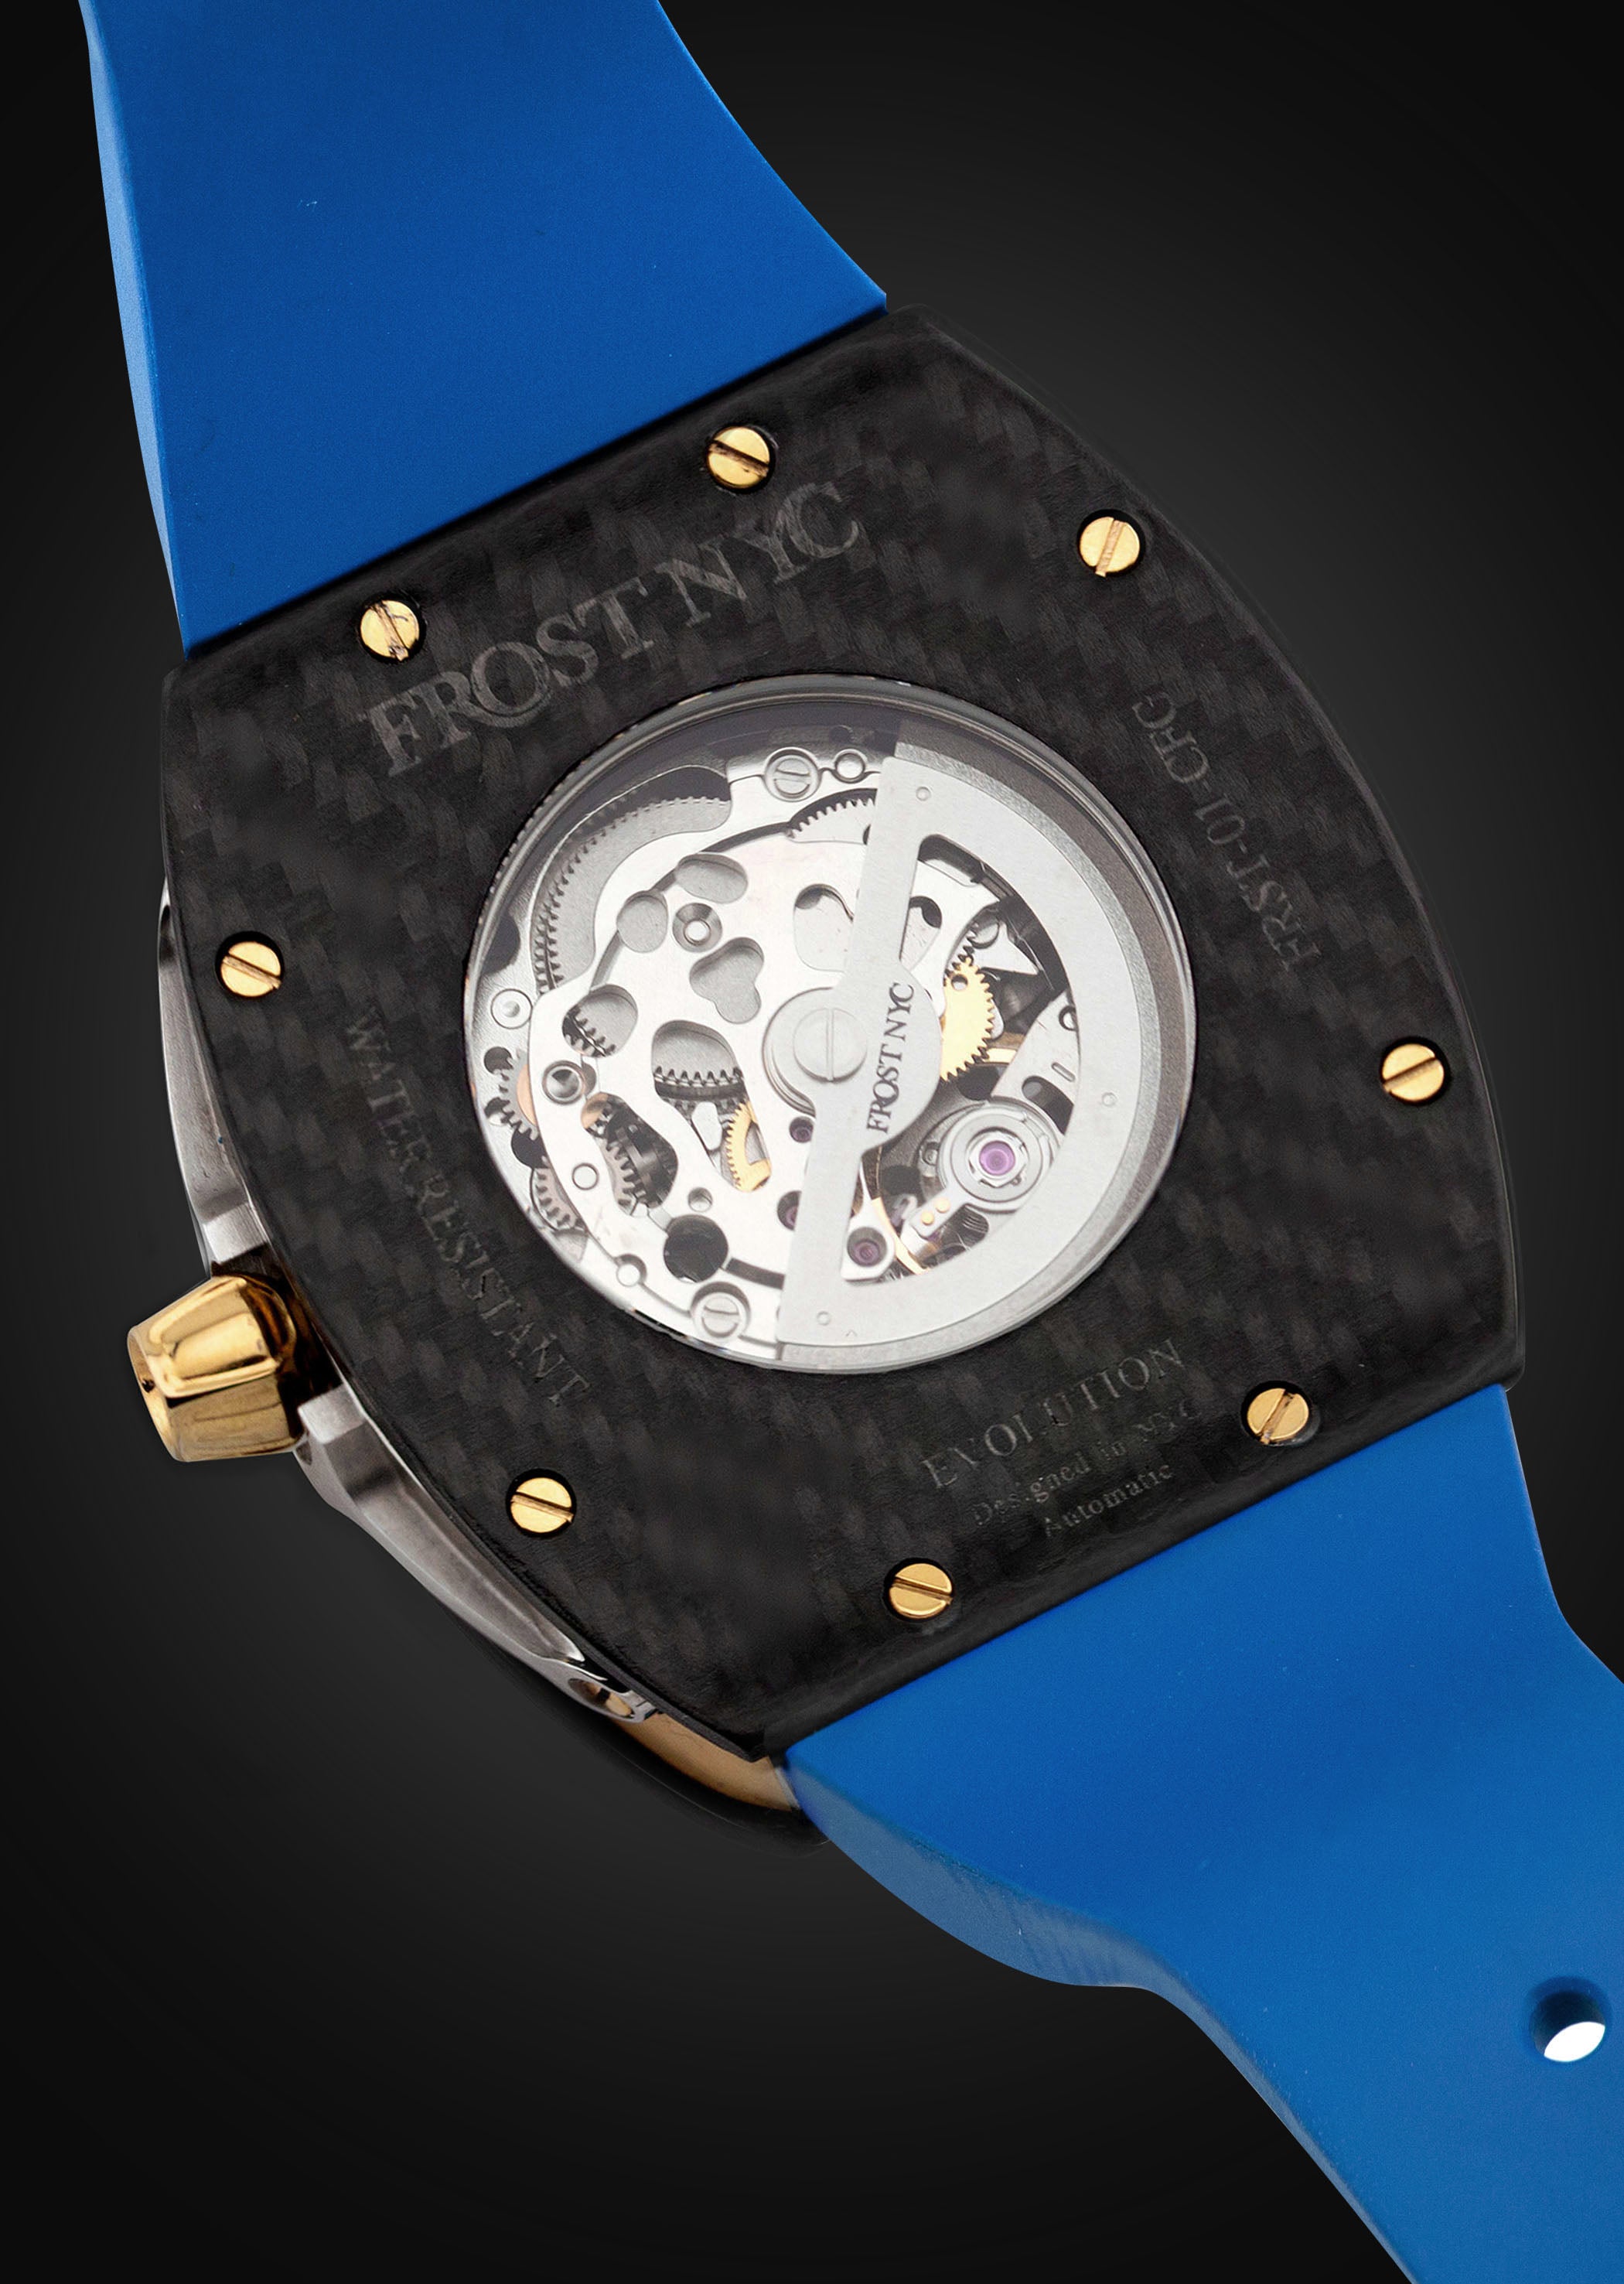 Frost NYC Mens Watch - Automatic Skeleton Carbon Fiber Sport Gold Watch | FRST-01-CFY | Blue